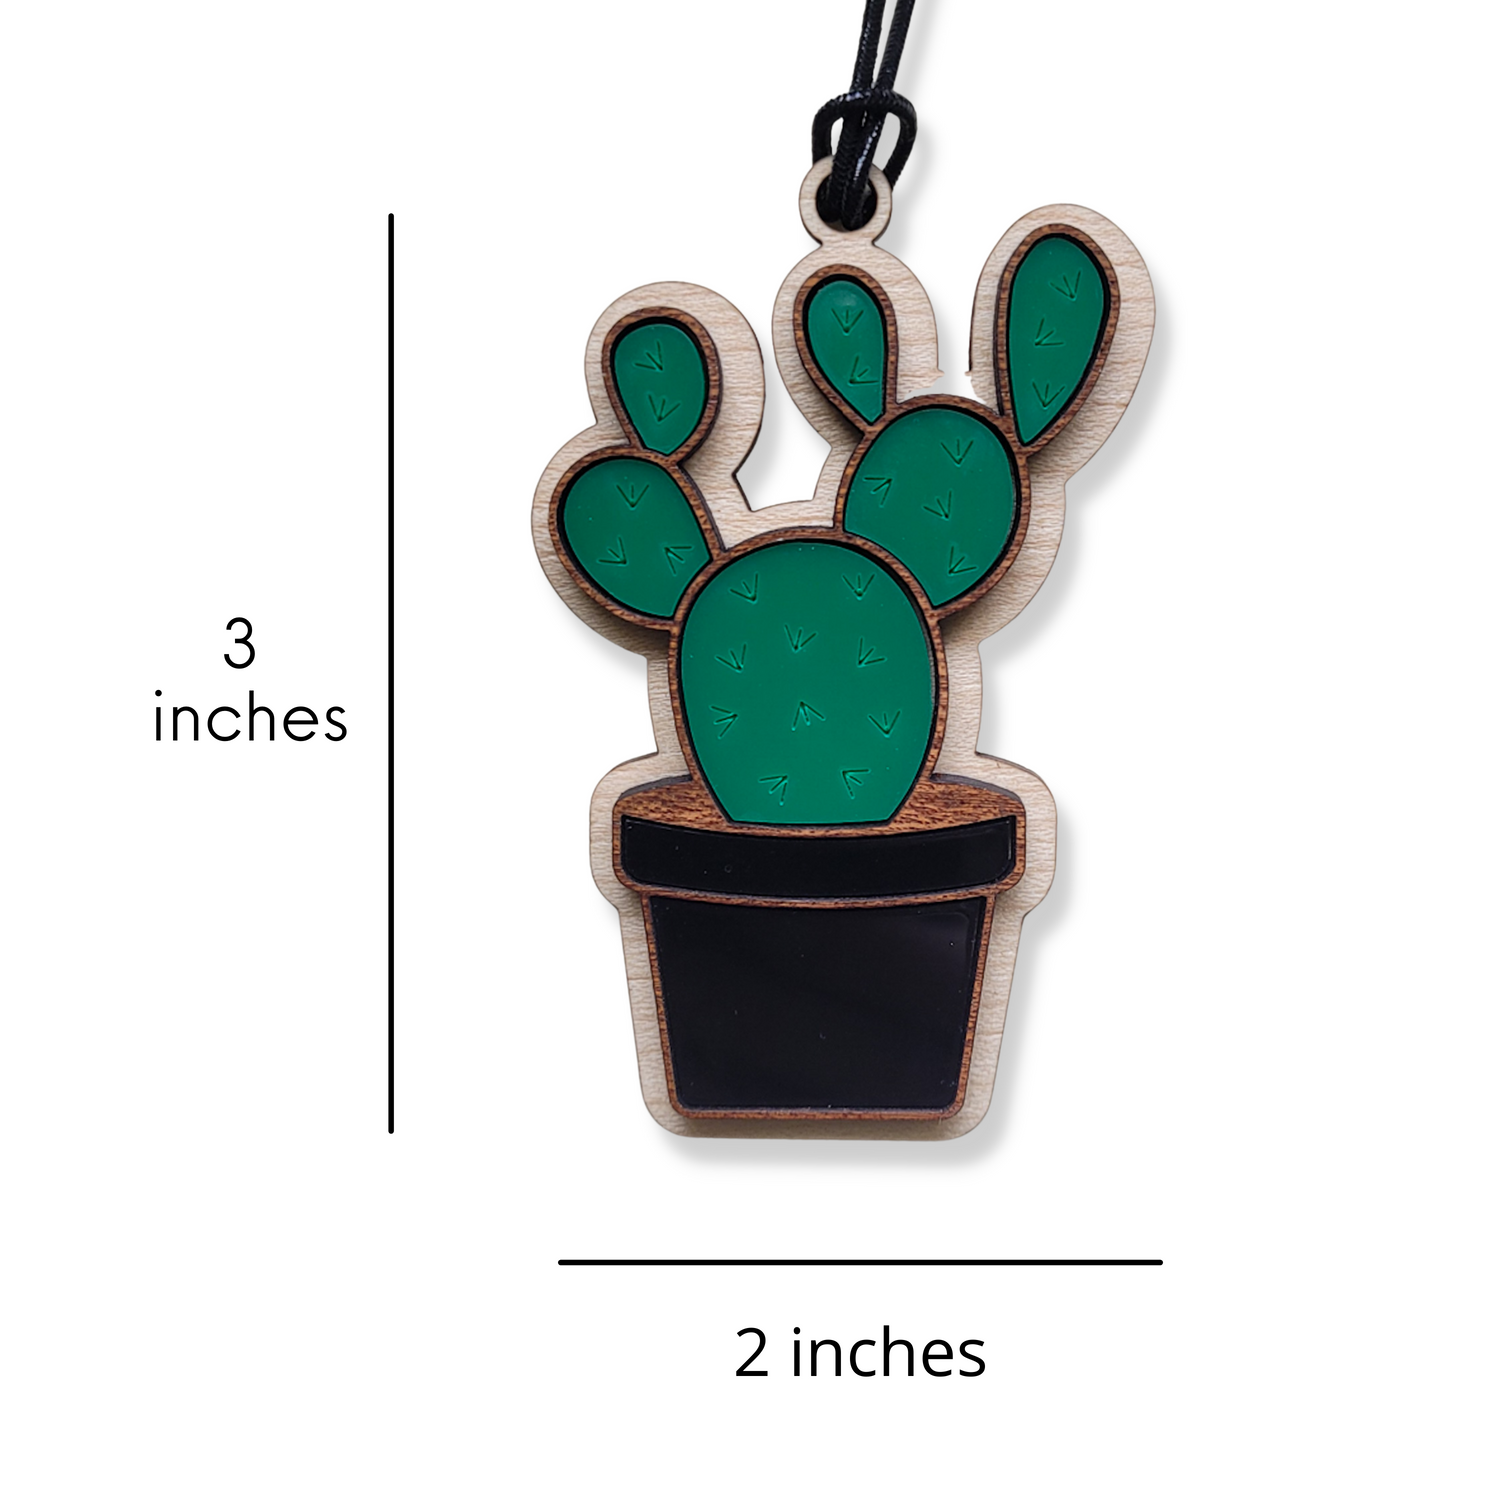 Wood Cactus Decor Christmas Ornament Gift for Plant Lovers